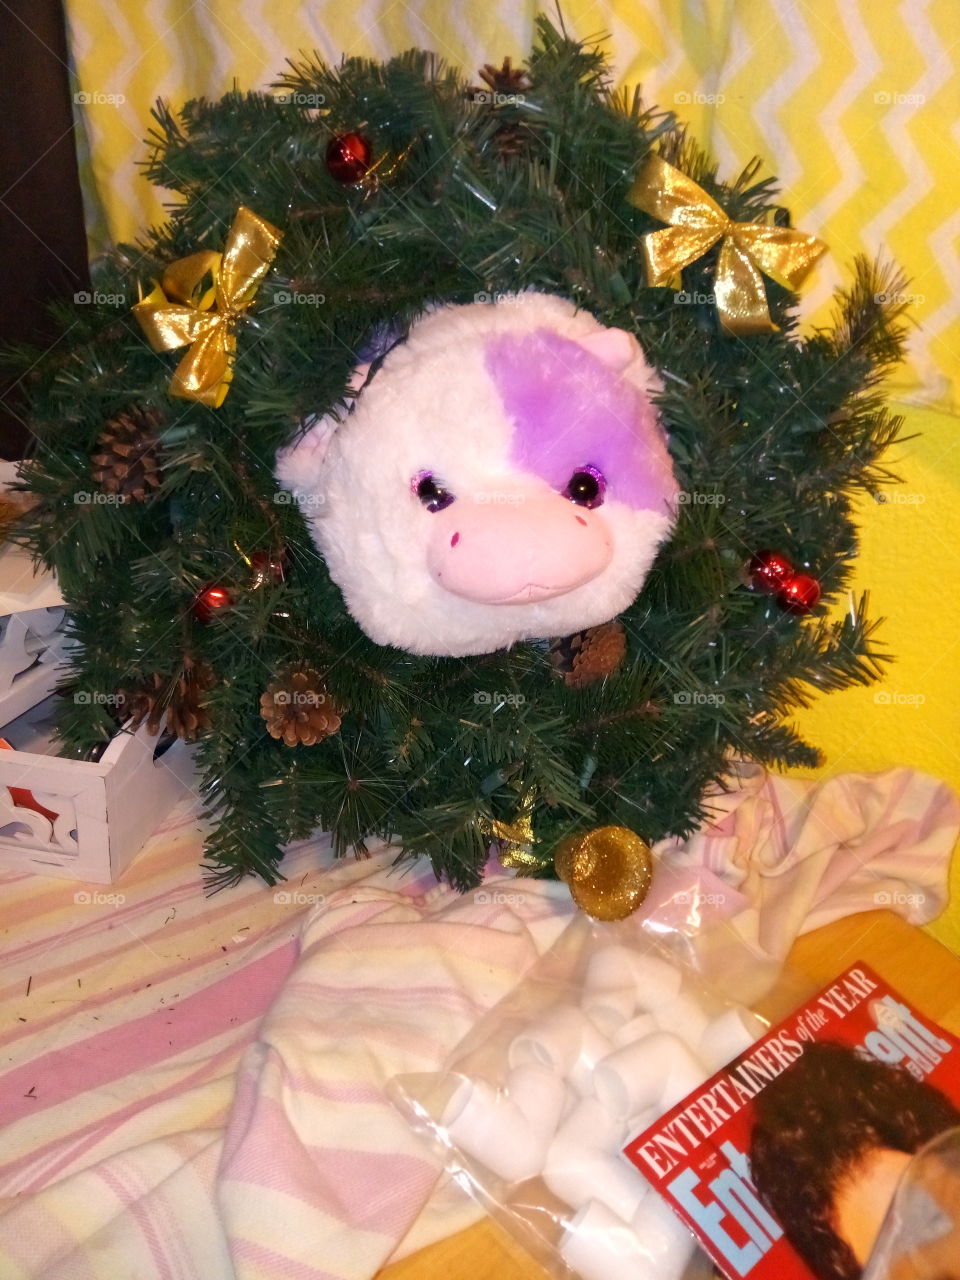 Decorating my stuffed cow for Christmas